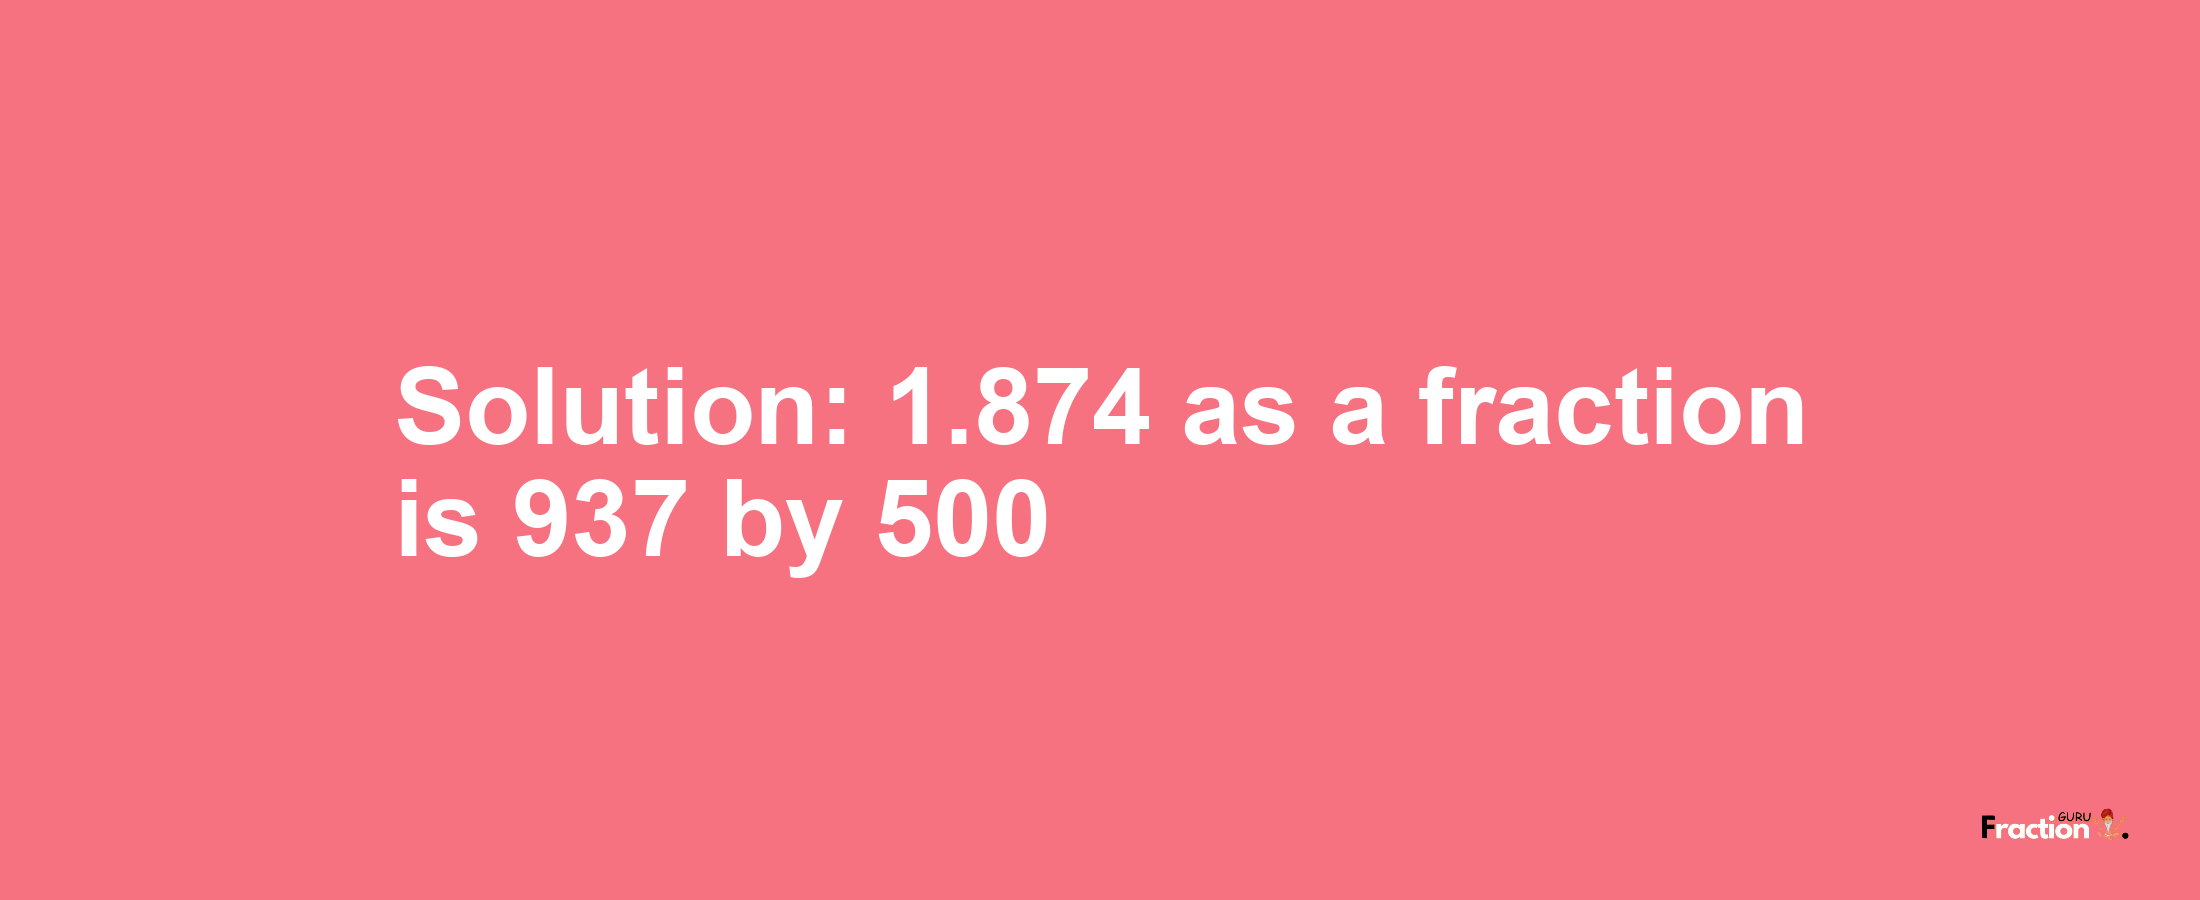 Solution:1.874 as a fraction is 937/500